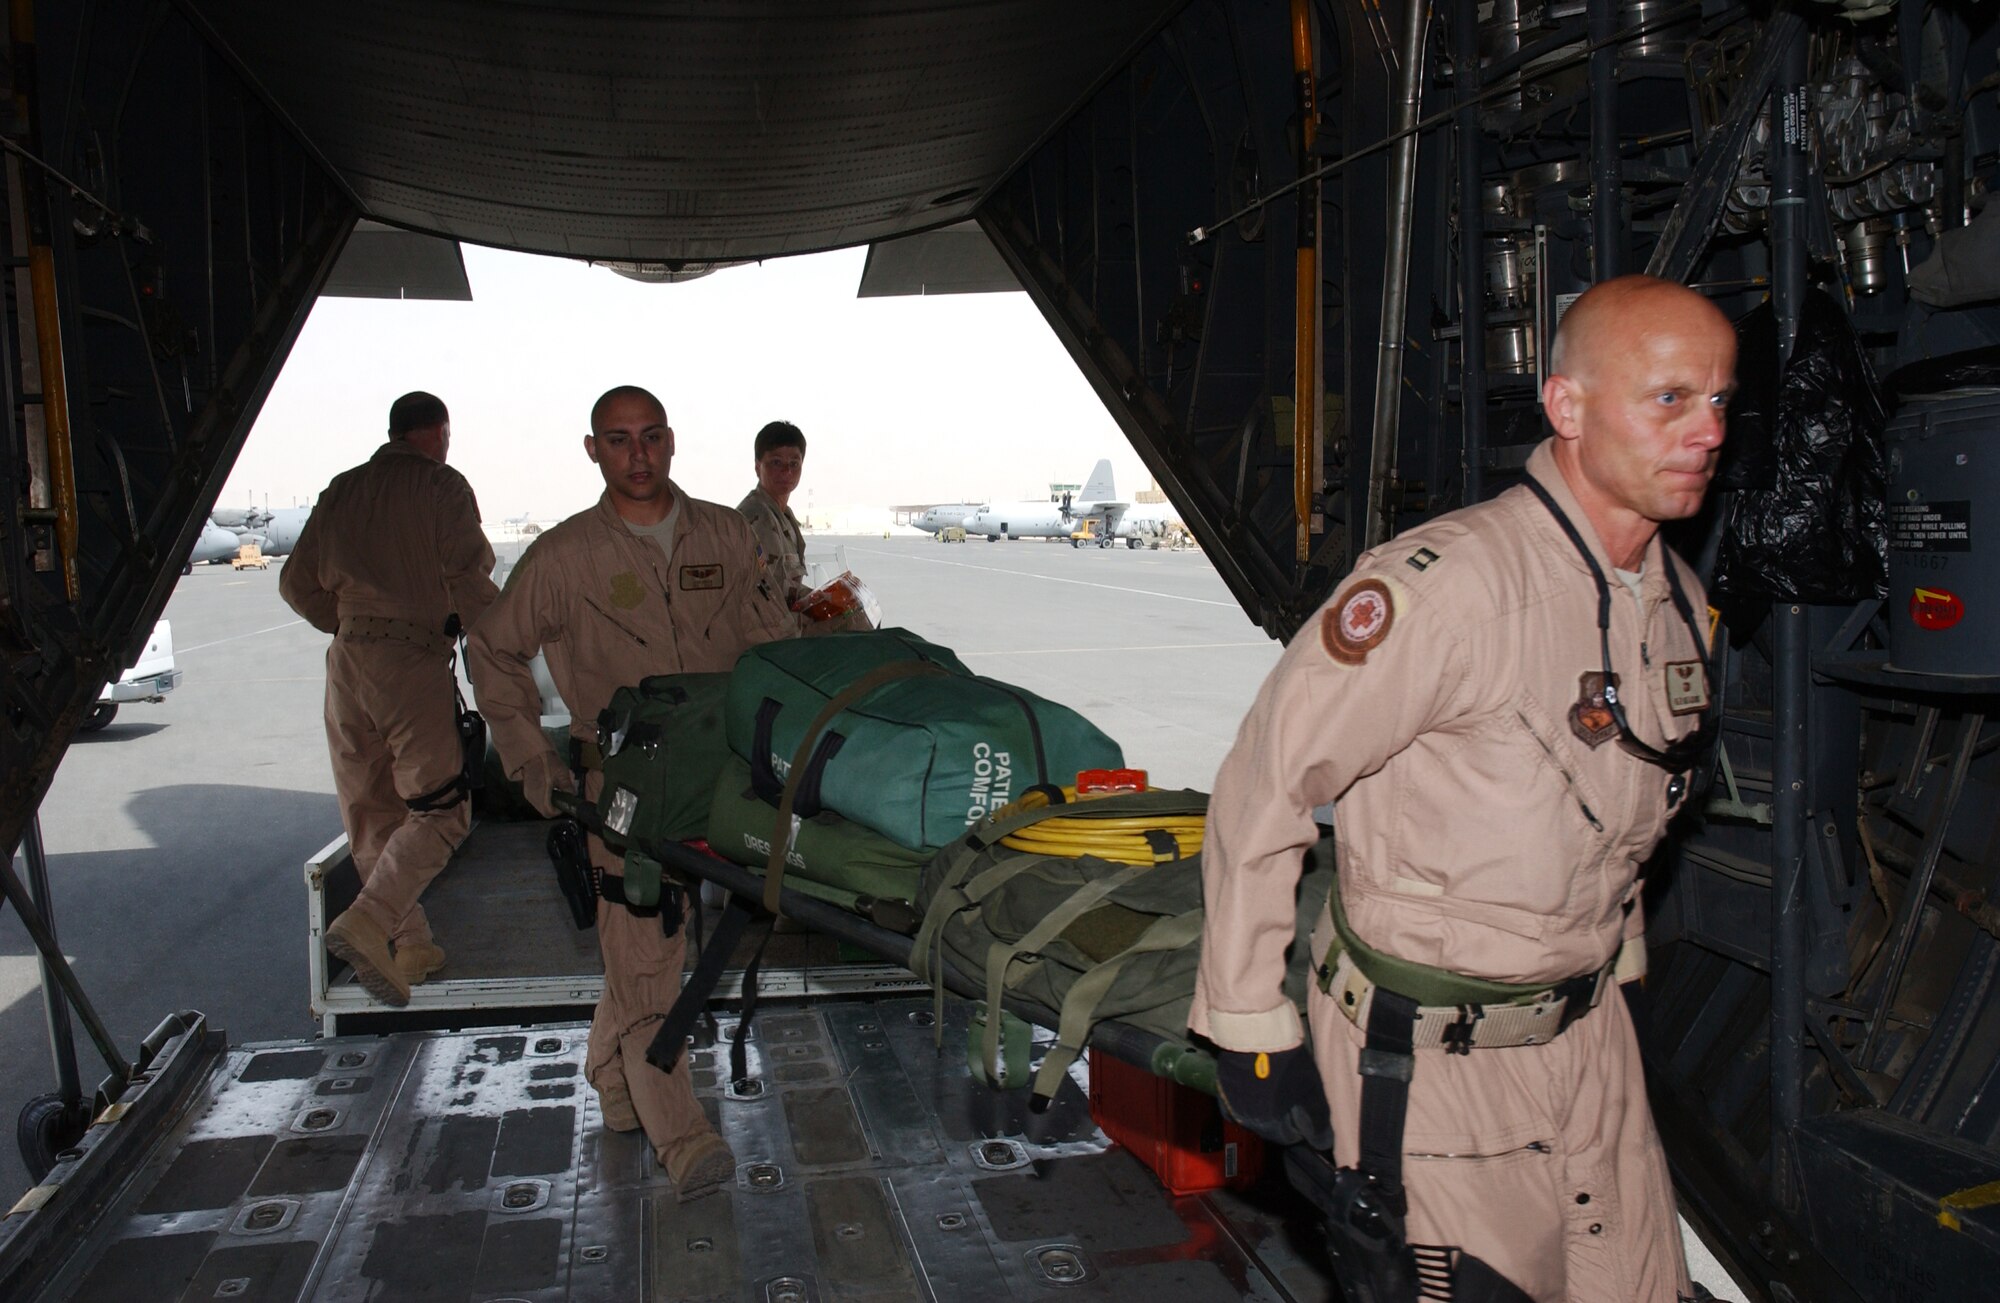 Capt. Ben Meadows (right), 379th Expeditionary Aeromedical Evacuation Squadron flight nurse, and Senior Airman Josh Green, 379th EAES technician, load up a C-130 Hercules with medical supplies and equipment in preparation for a mission in Southwest Asia. The Air National Guardsmen are part of a Total Force team comprised of active duty, Reserve and Air National Guard personnel. About 90 percent of Air Force aeromedical evacuation personnel and assets are from the Reserve components. (Photo by Tech. Sgt. Deborah Davis)
